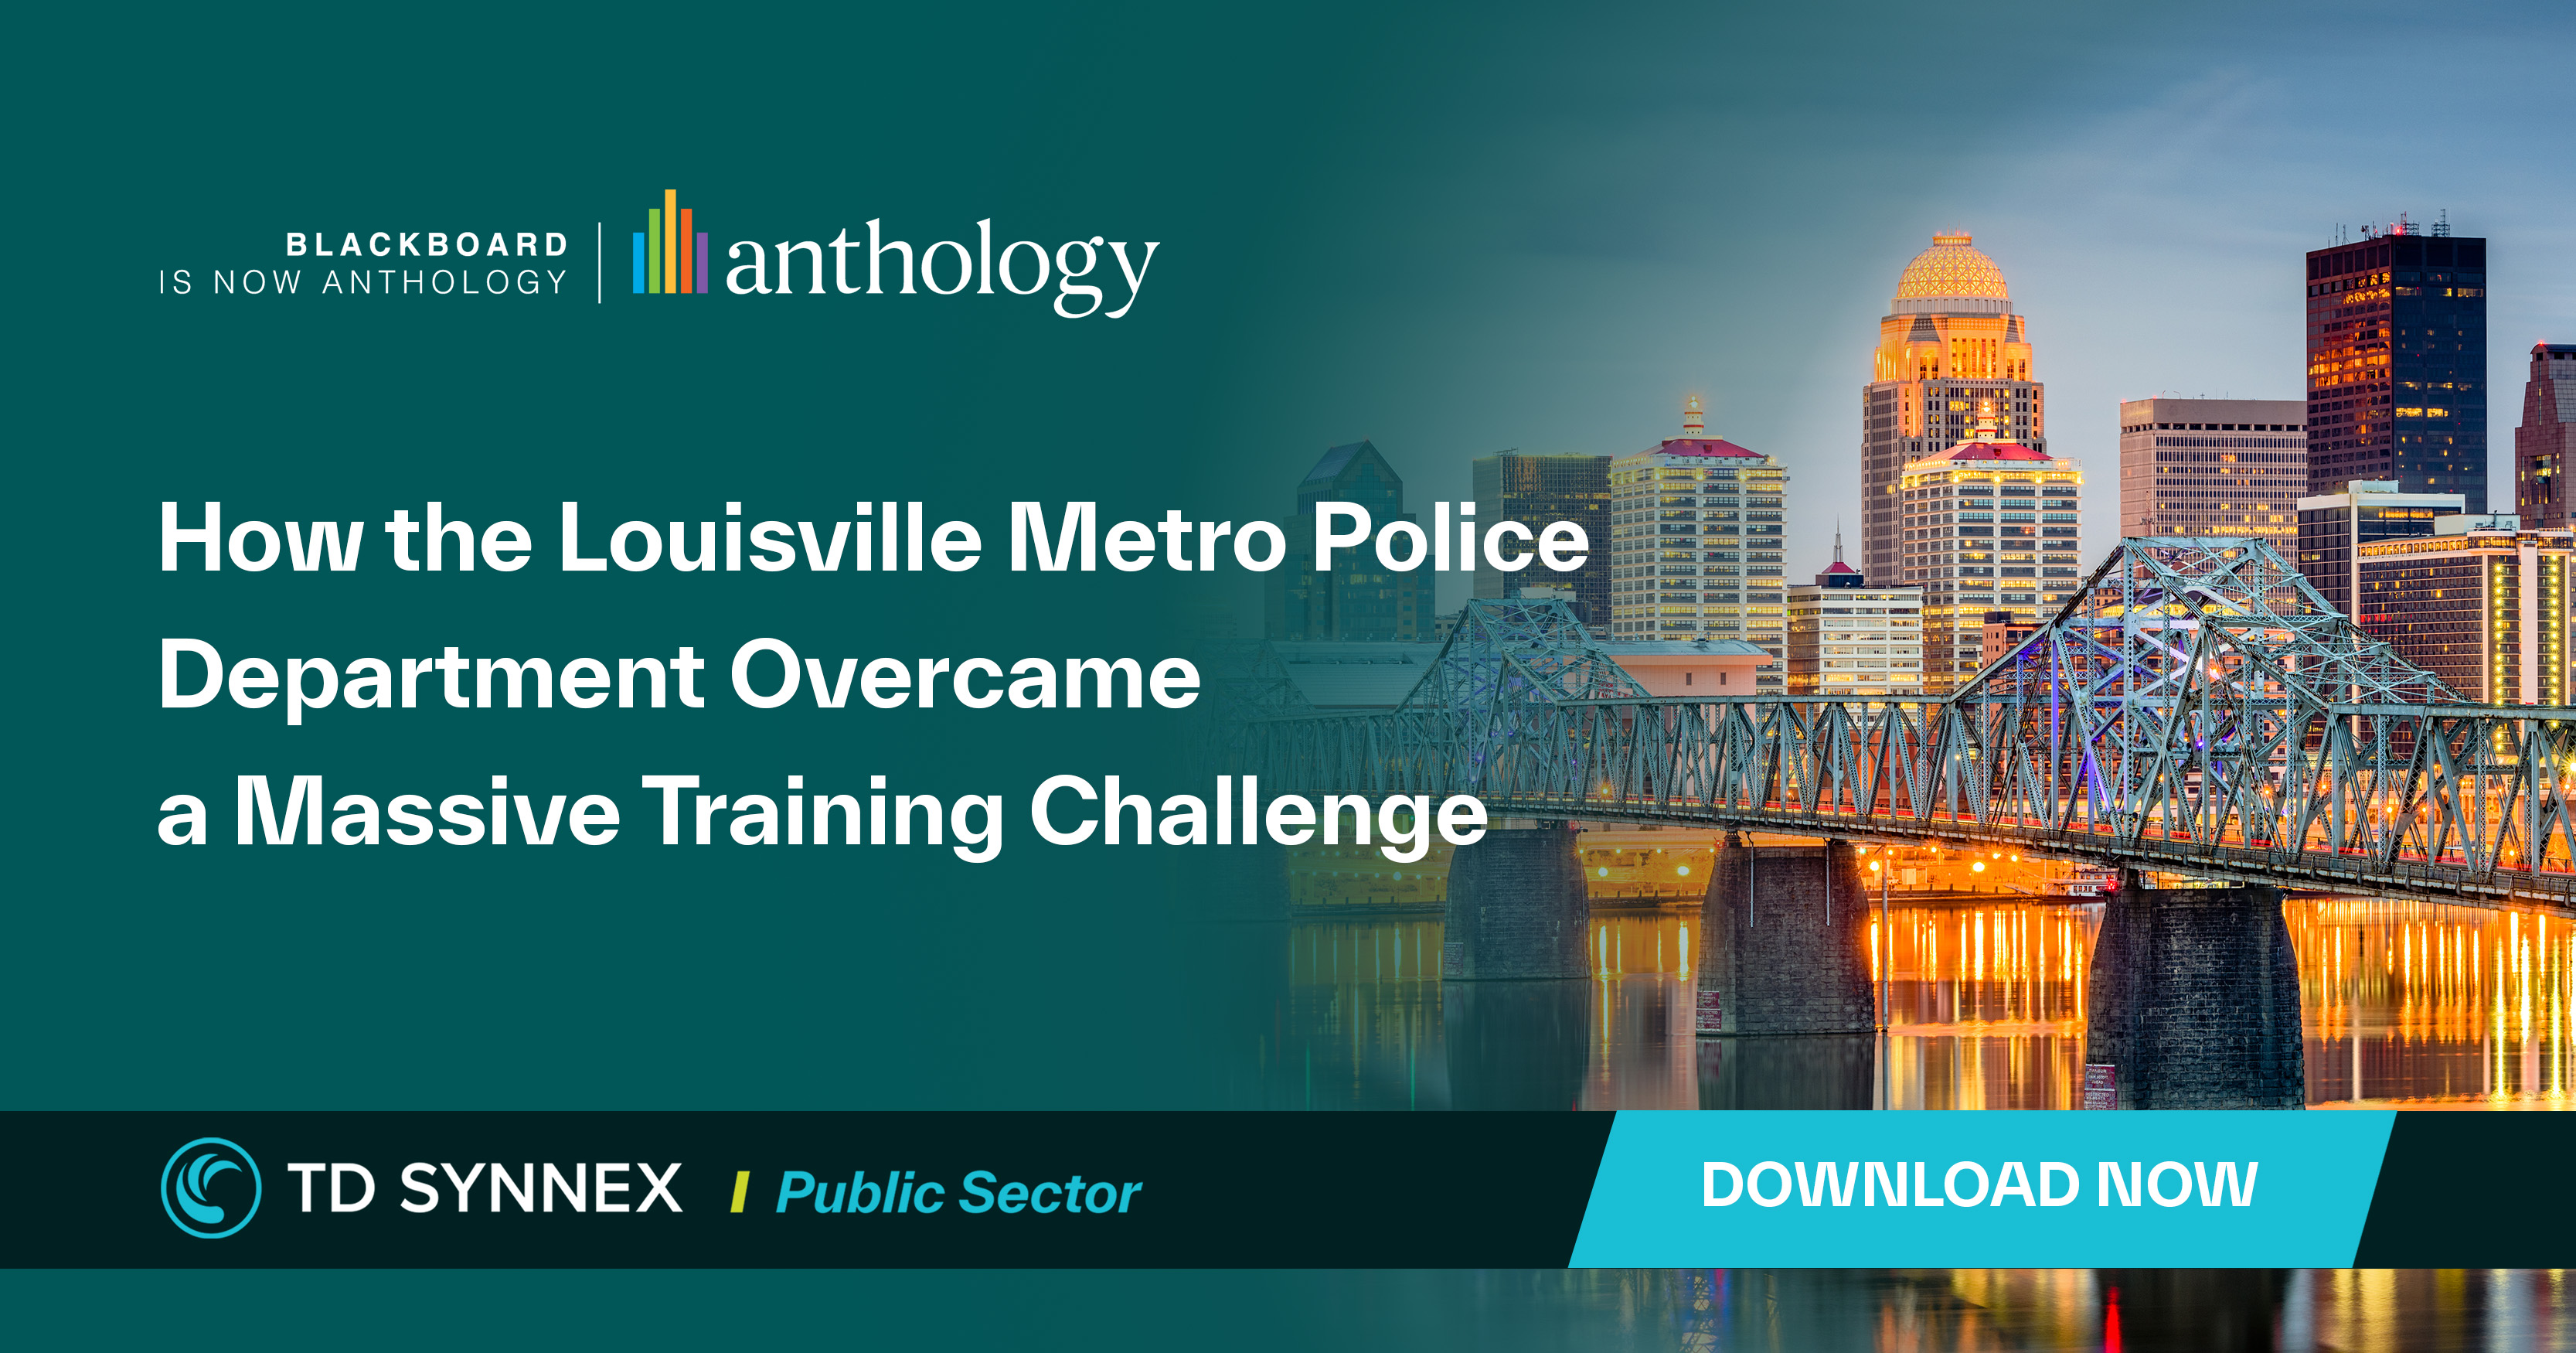 View of a bridge in Louisville. Text reads: How the Louisville Metro Police Department Overcame a Massive Training Challenge. CTA: Download now